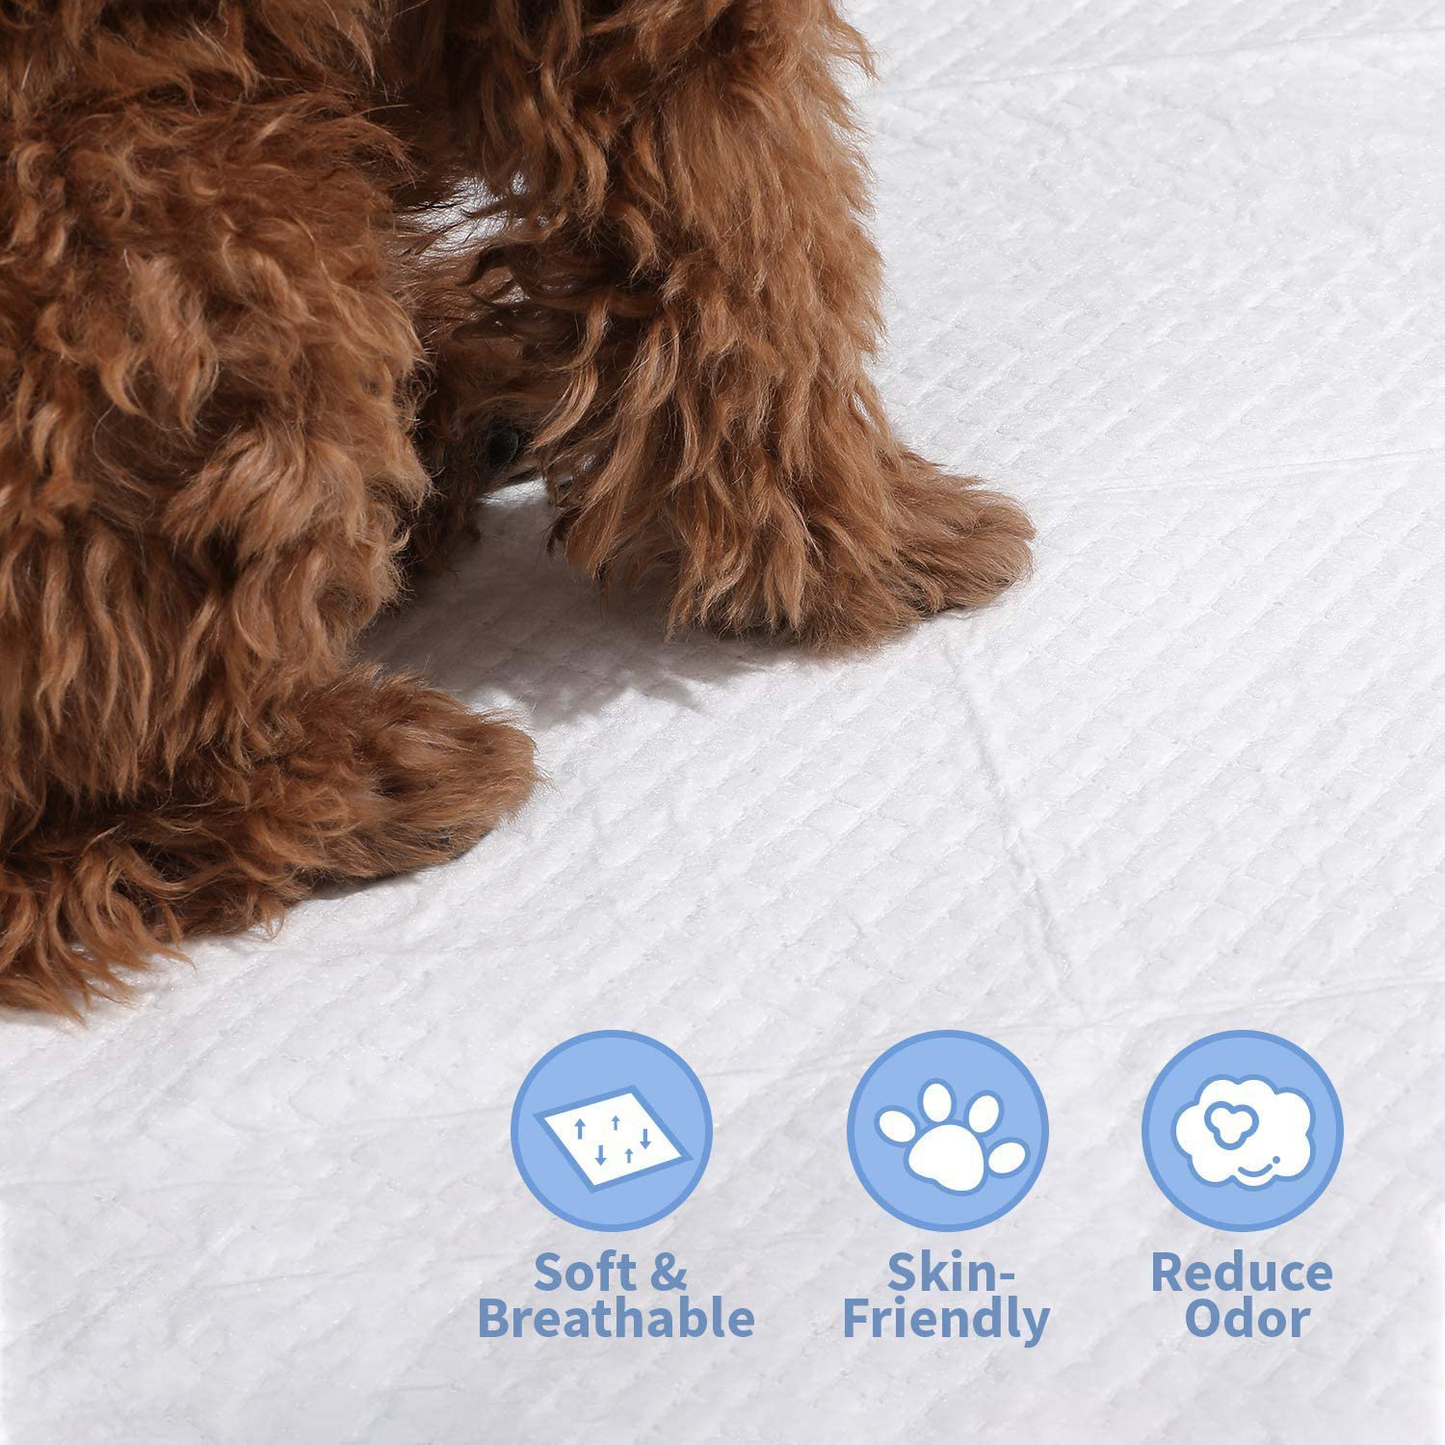 Binetgo Disposable Puppy Training Pads 13" X 18" -100 Count Puppy Pads | Premium Puppy Potty Training Pads，Potty Pads Bed Pads, Underpads Ultra Absorbent Incontinence Pet Training Pads…